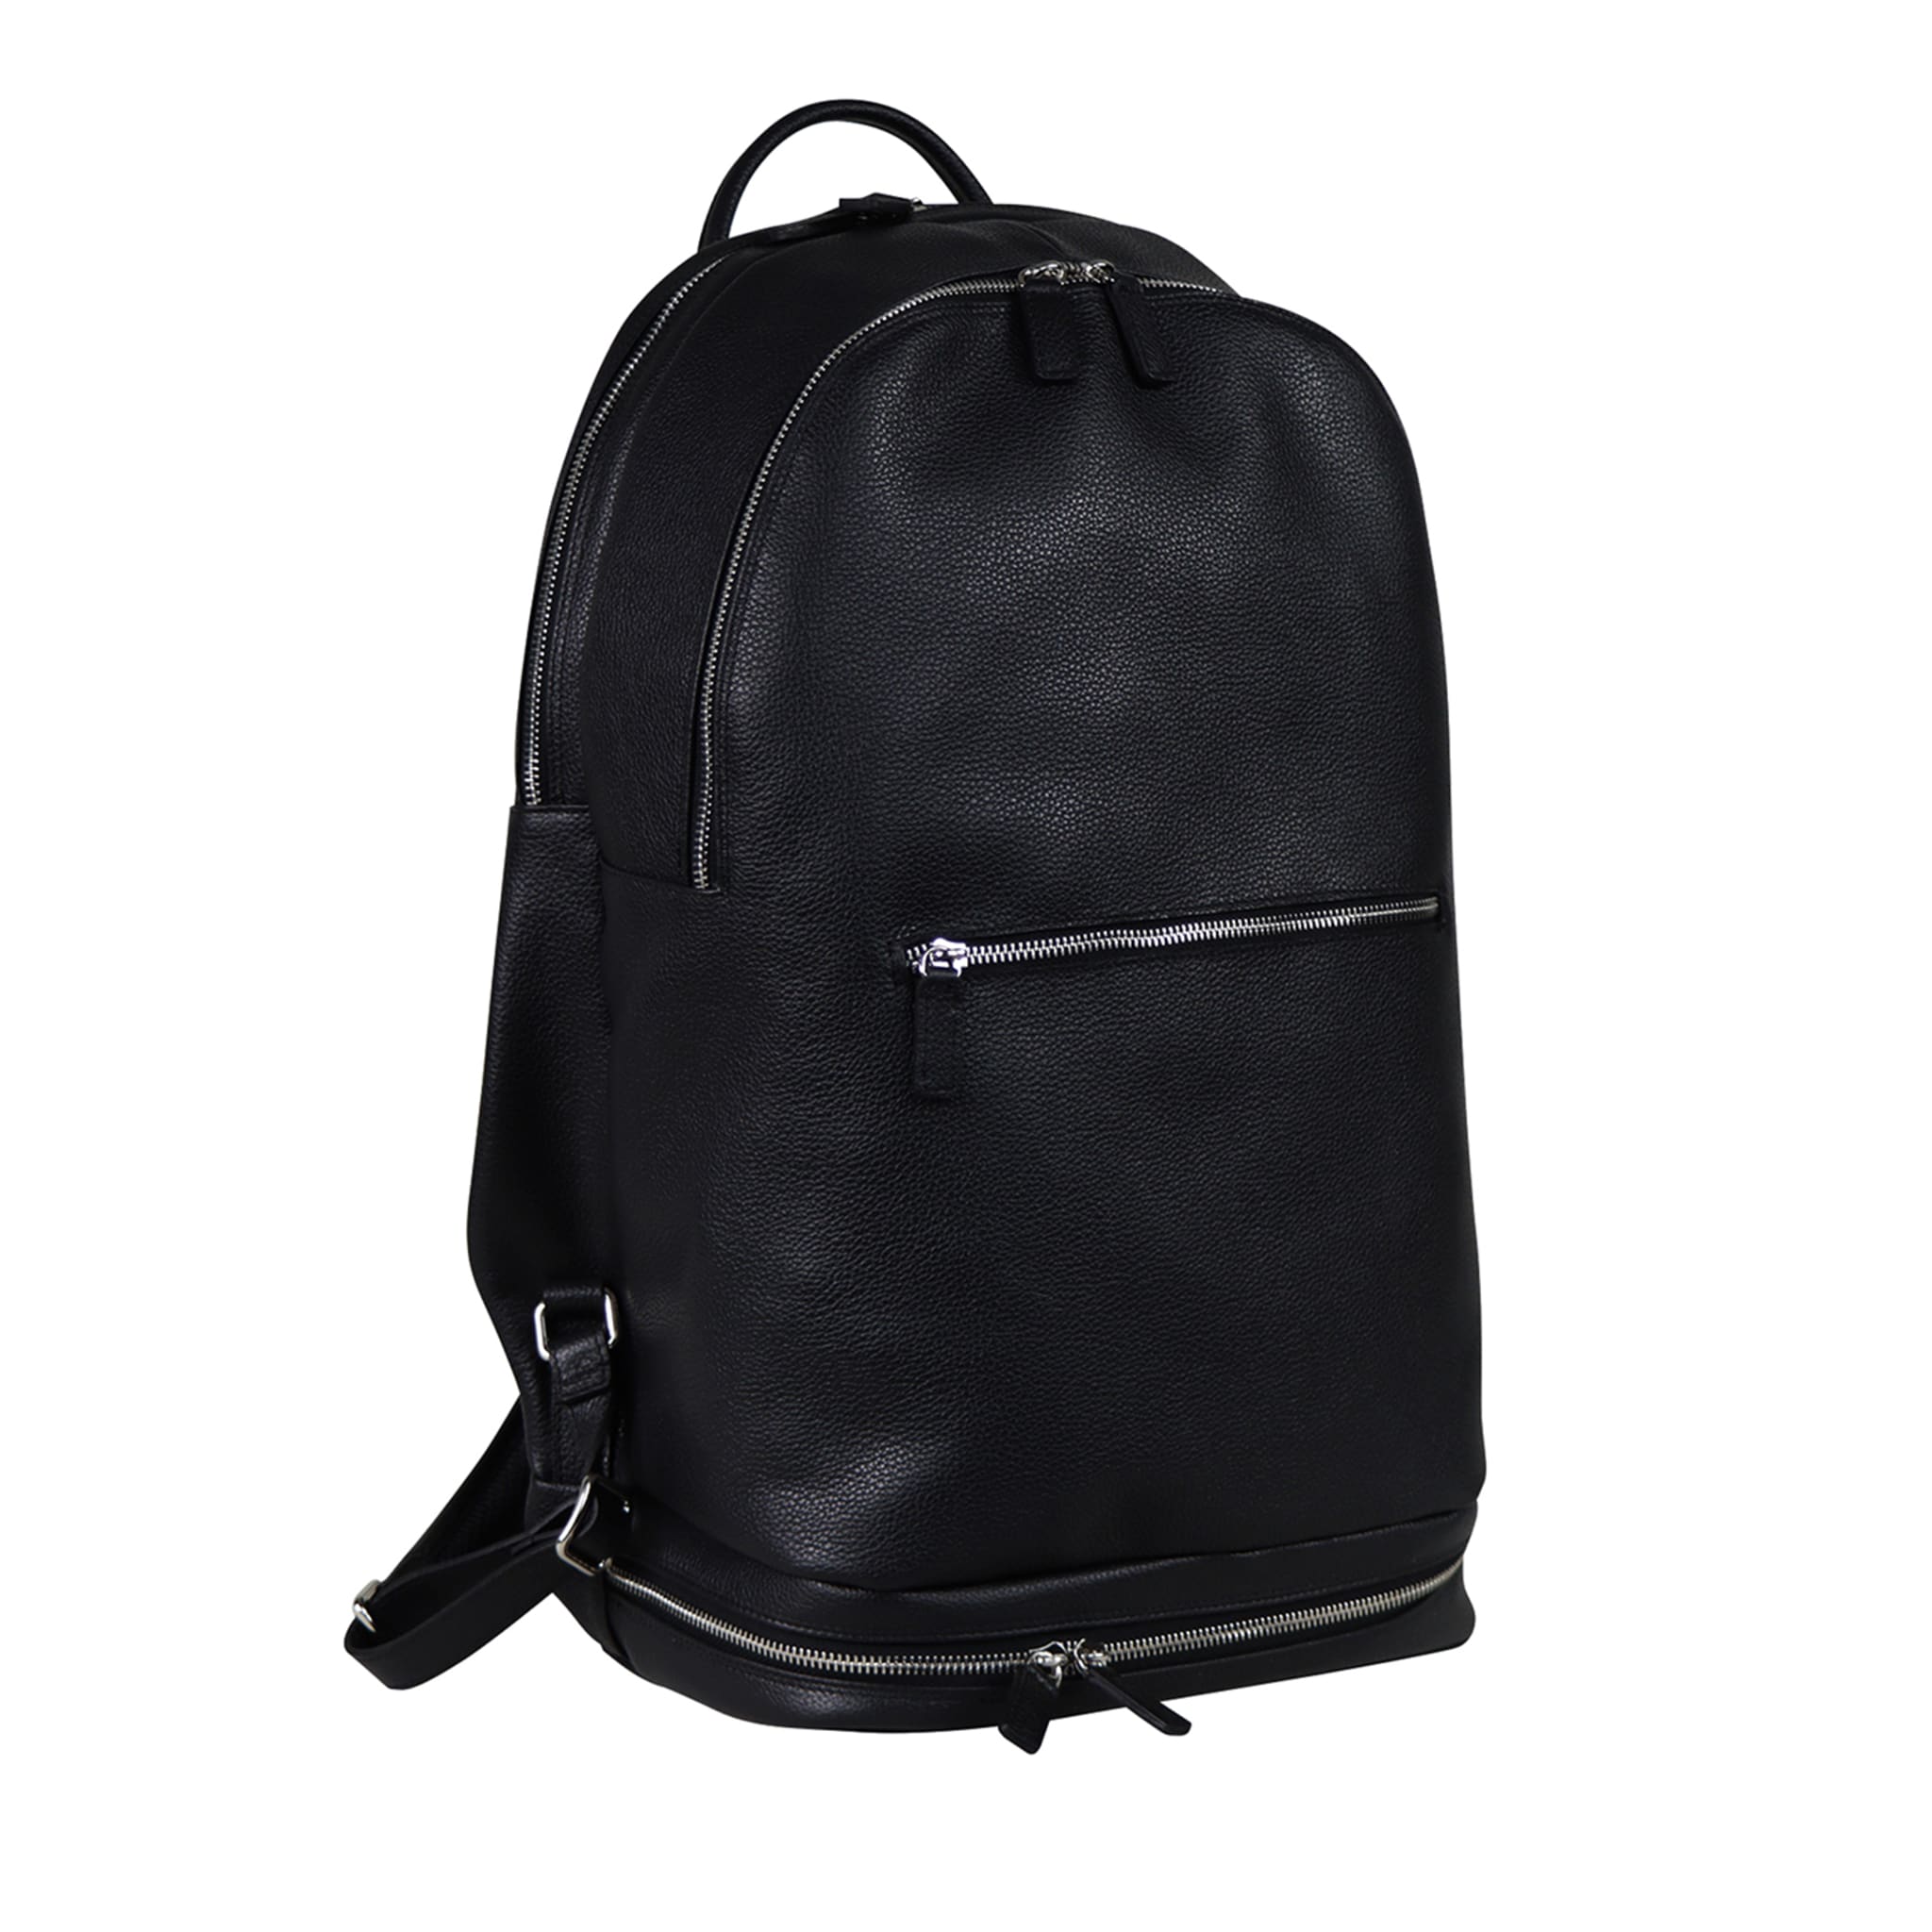 Black Sports Backpack - Main view